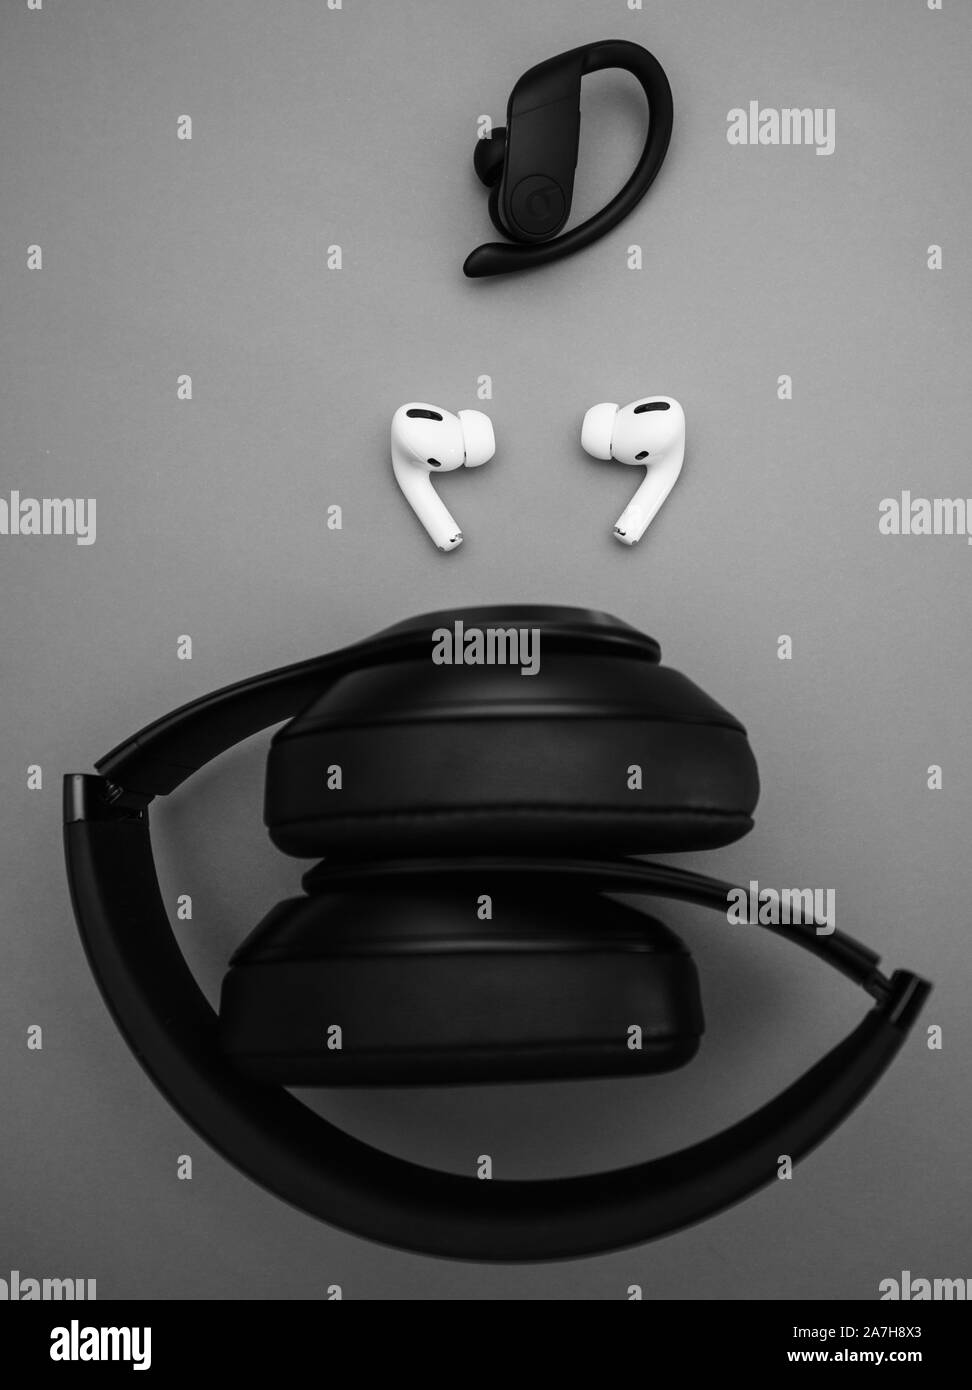 Paris, France - Oct 30, 2019: View from above of New Apple Computers AirPods Pro headphones with Active Noise Cancellation for immersive sound with Po Stock Photo